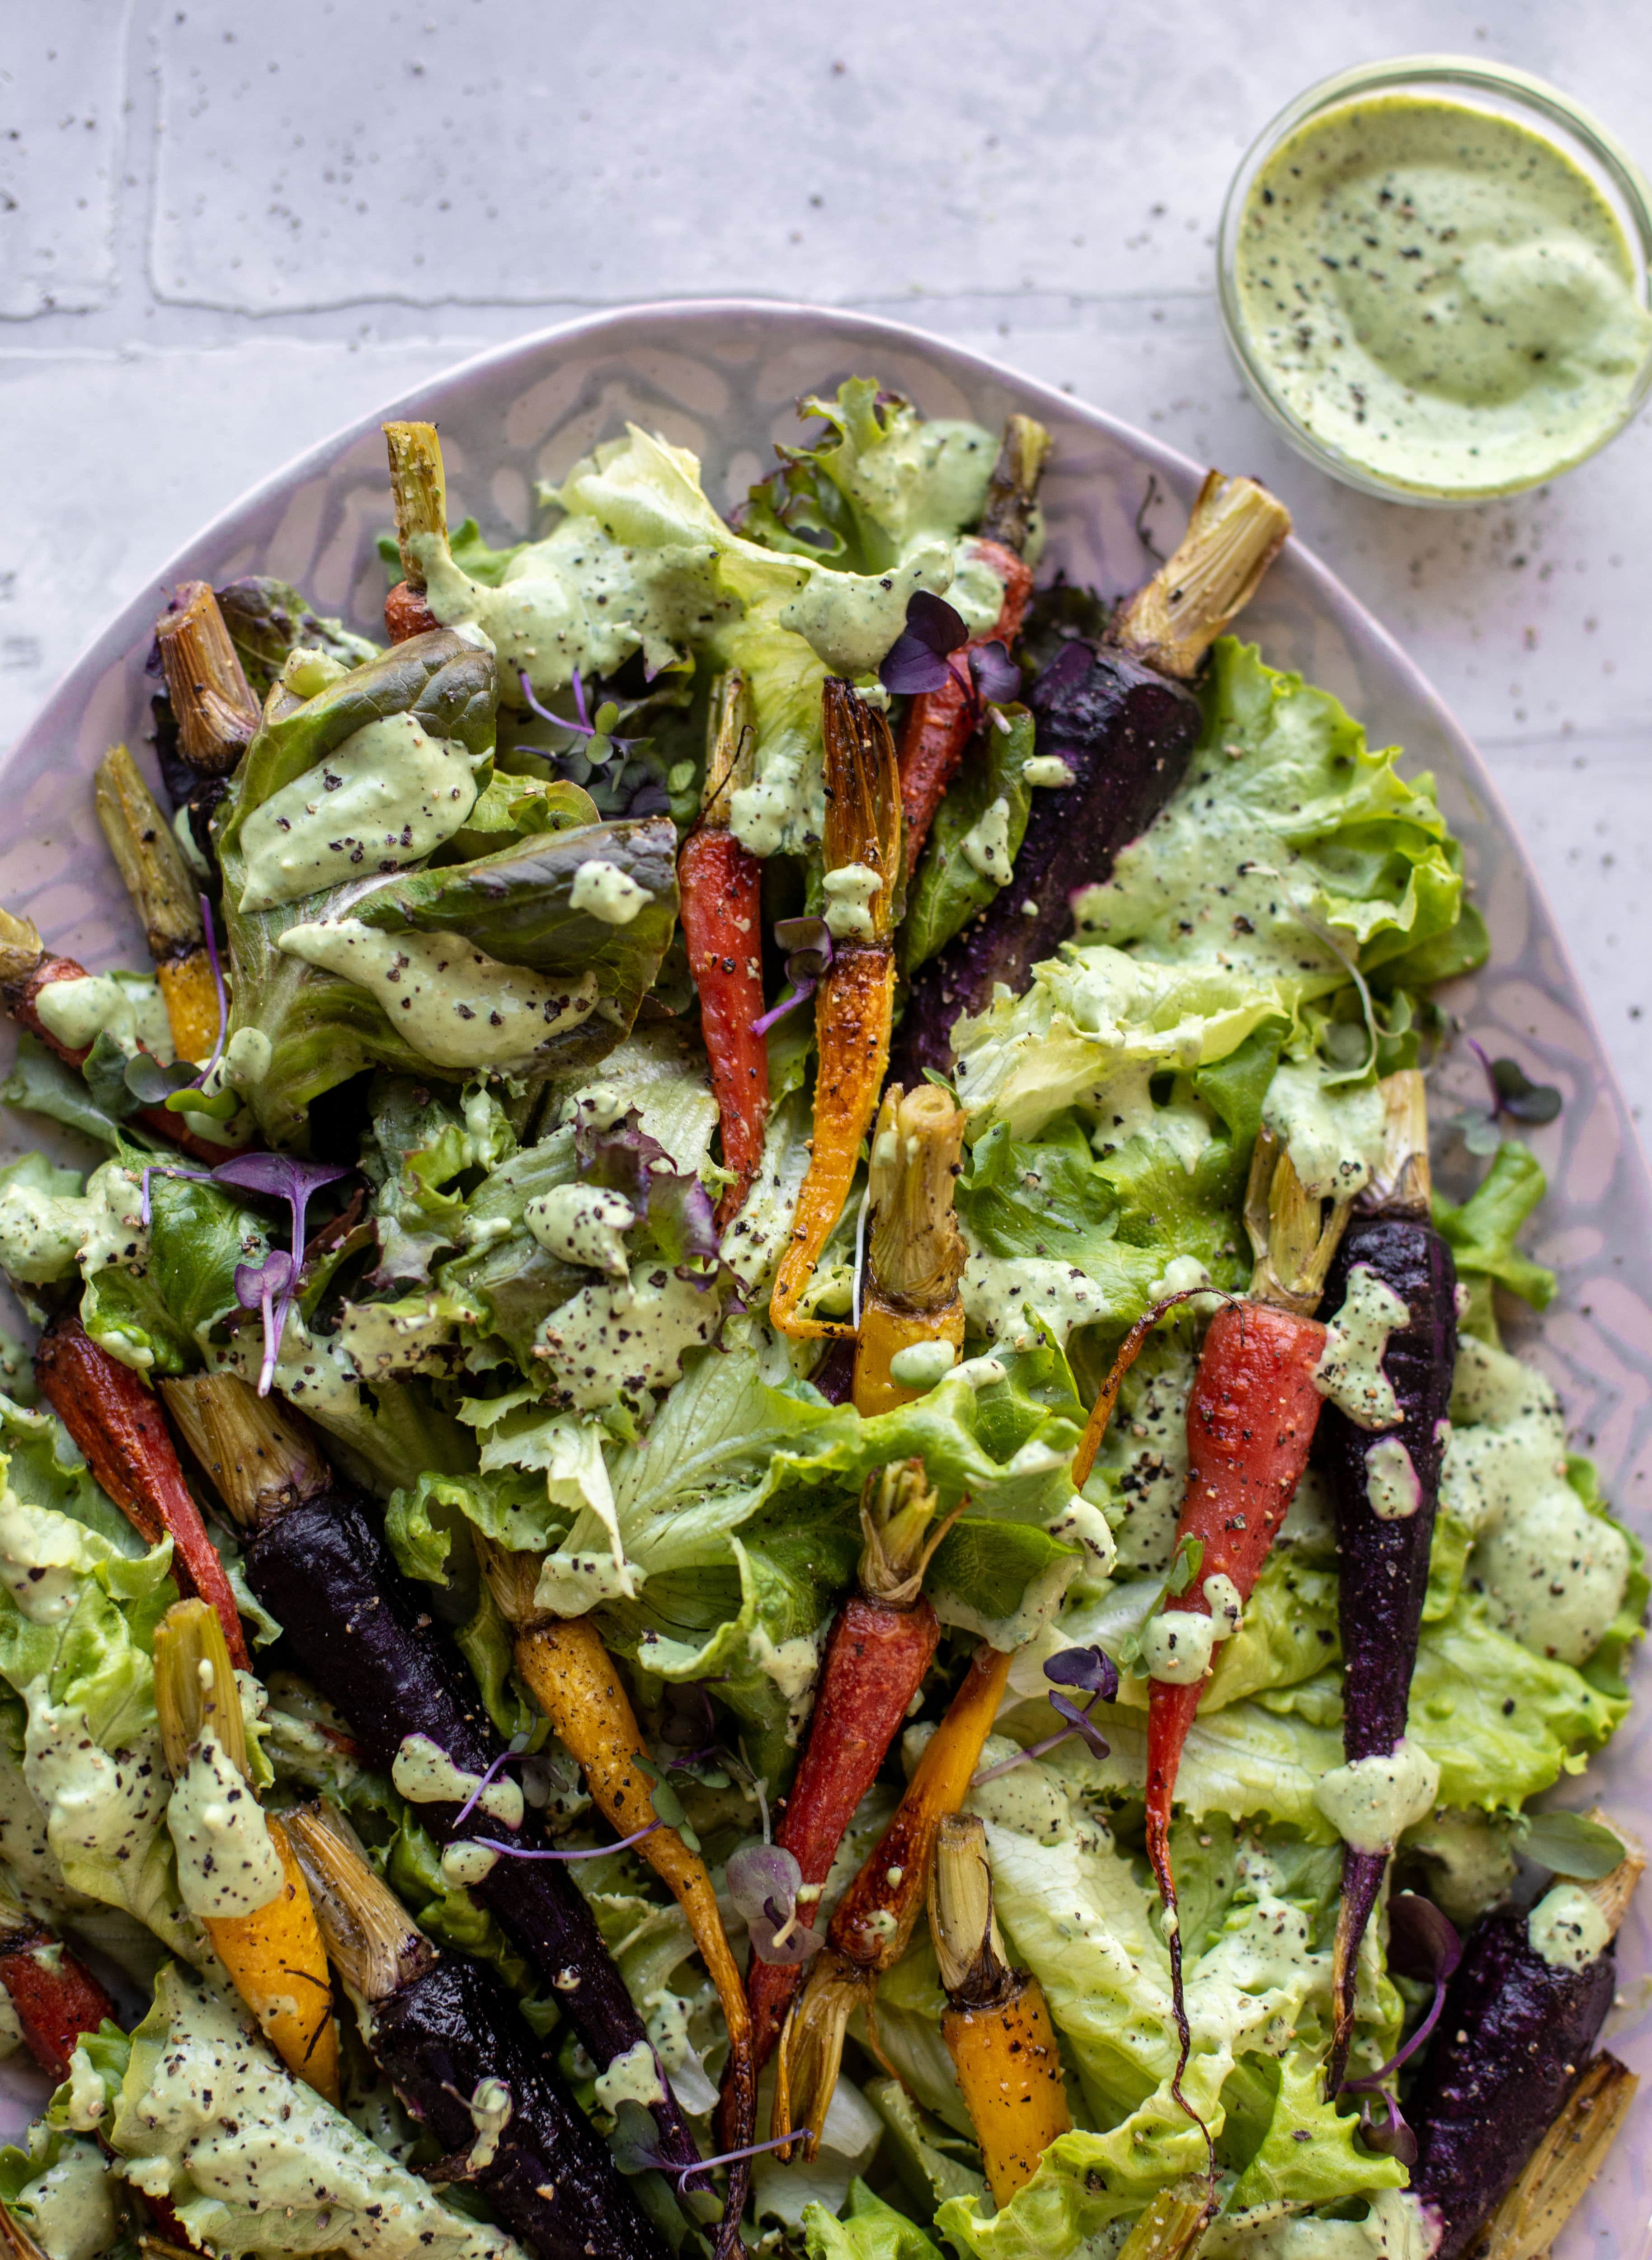 This roasted carrot salad is perfect for spring! Caramely, roasted carrots served over butter greens dressing with green goddess. Simple but delish.